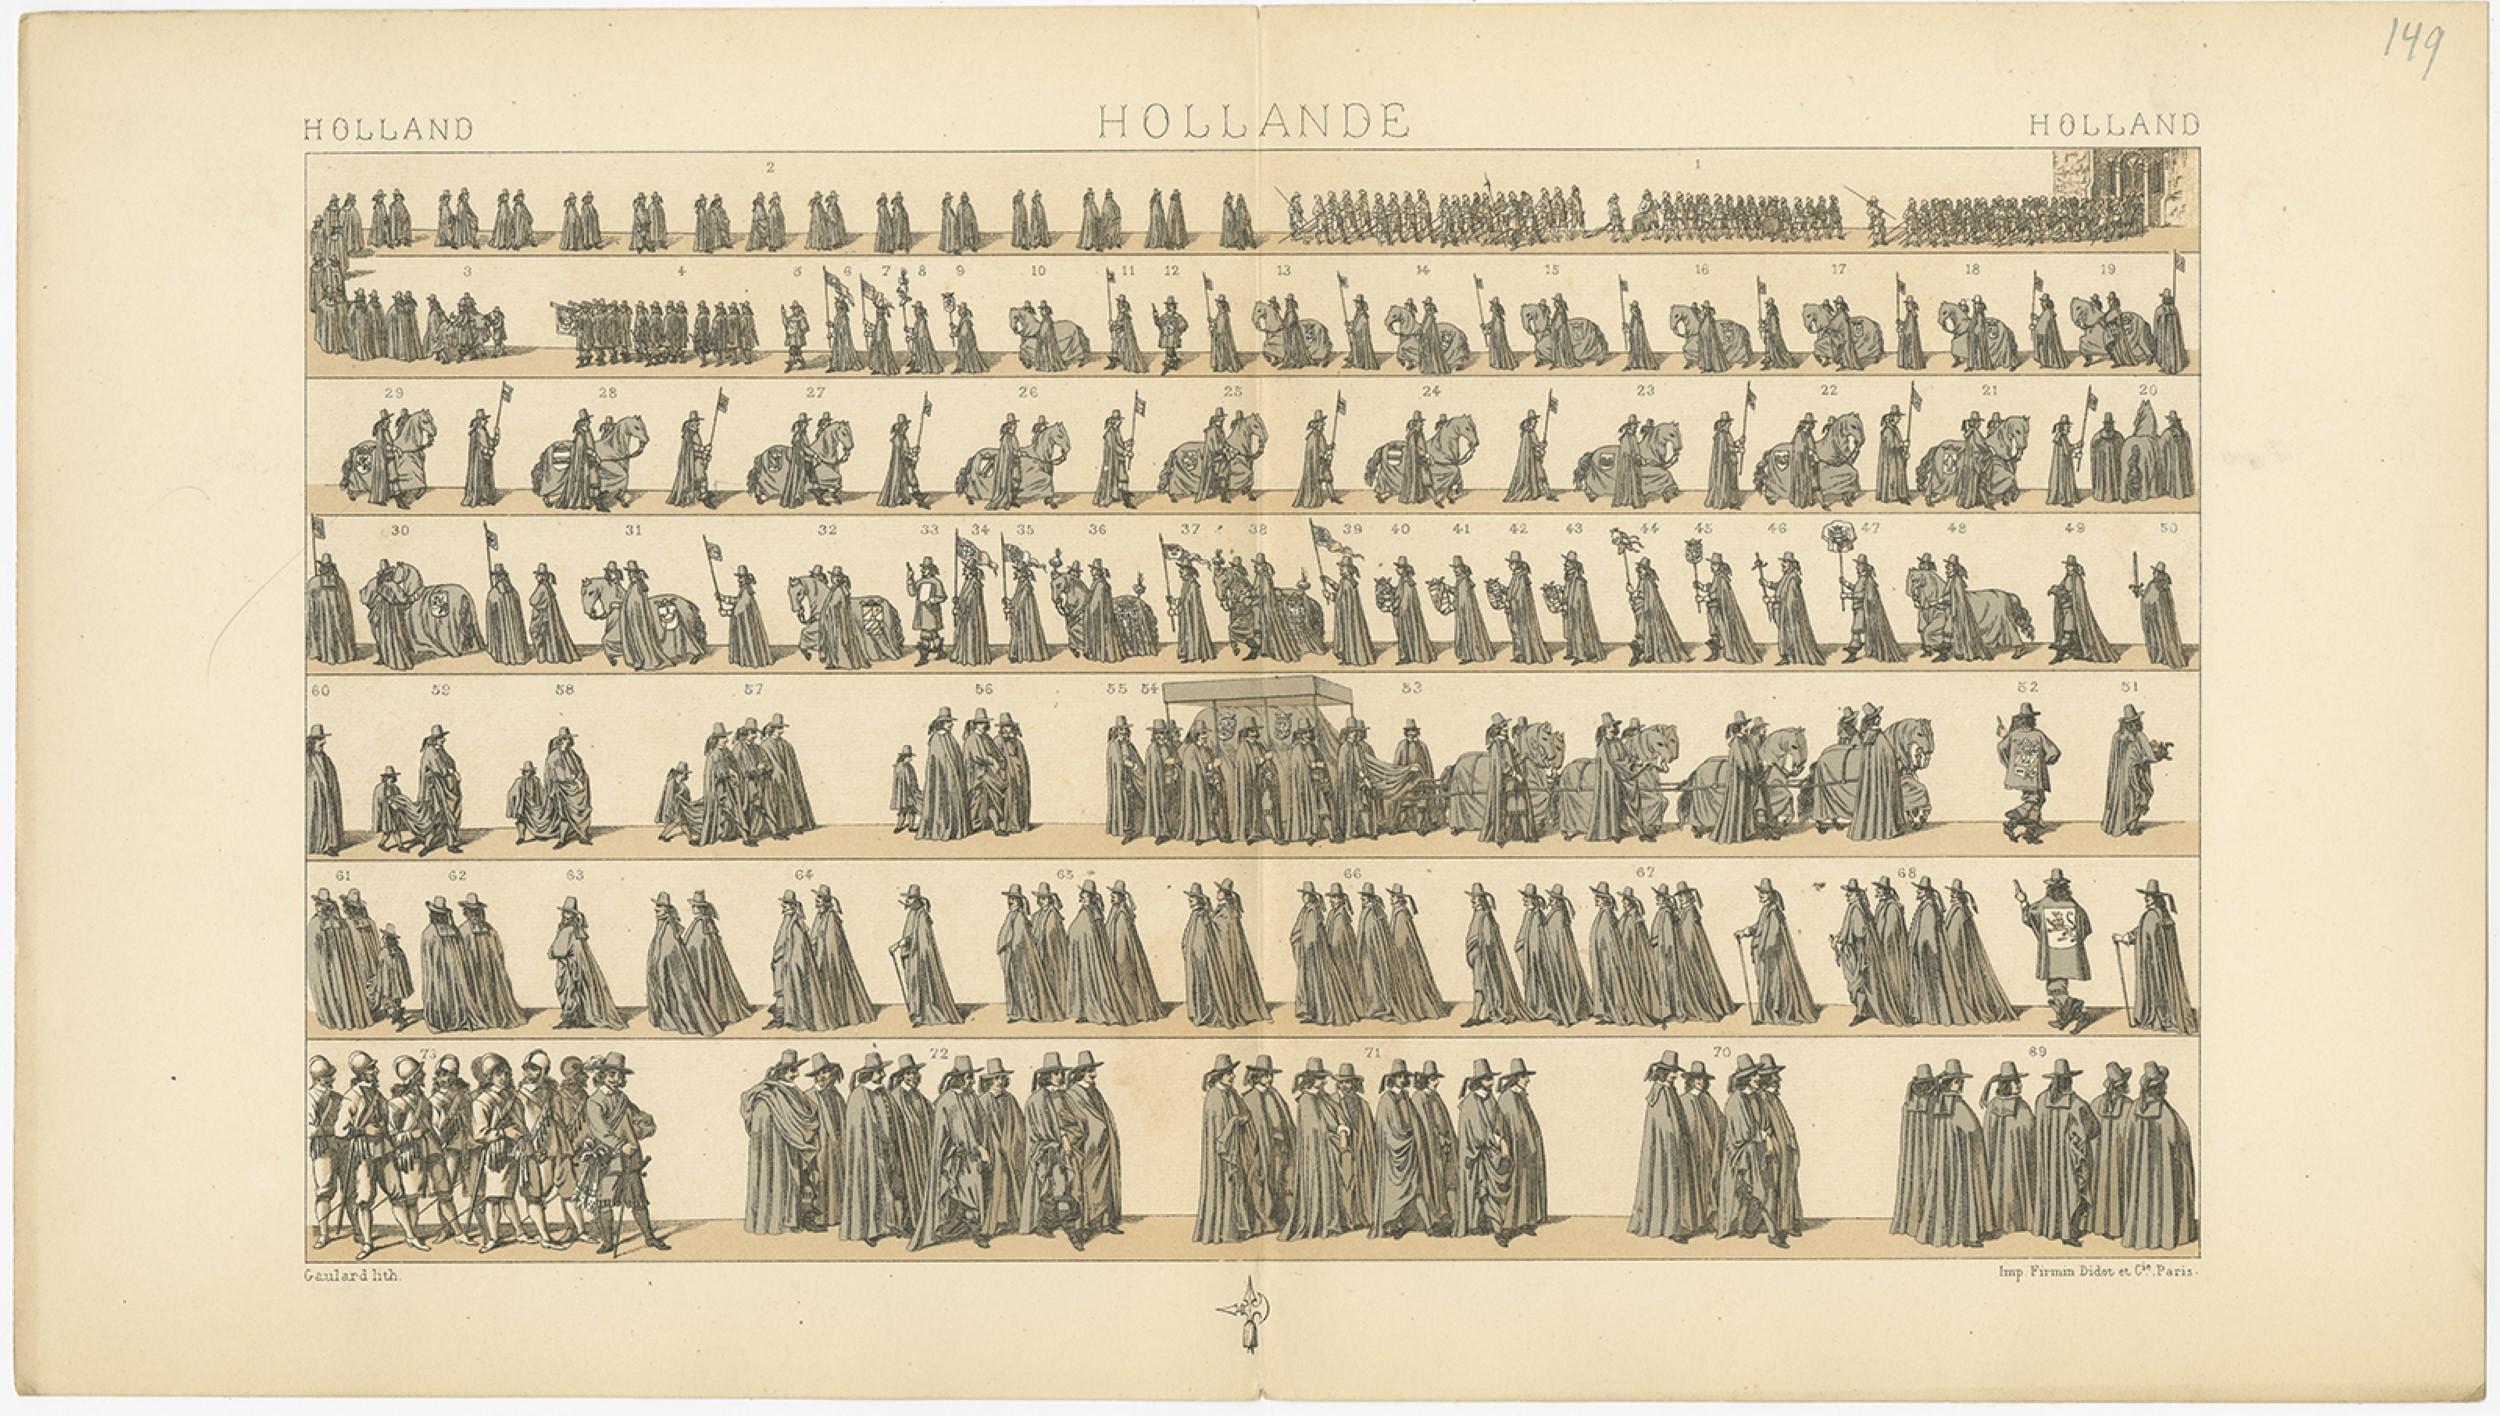 Antique print titled 'Holland - Hollande - Holland'. Chromolithograph of Holland military parade. This print originates from 'Le Costume Historique' by M.A. Racinet. Published, circa 1880.

   